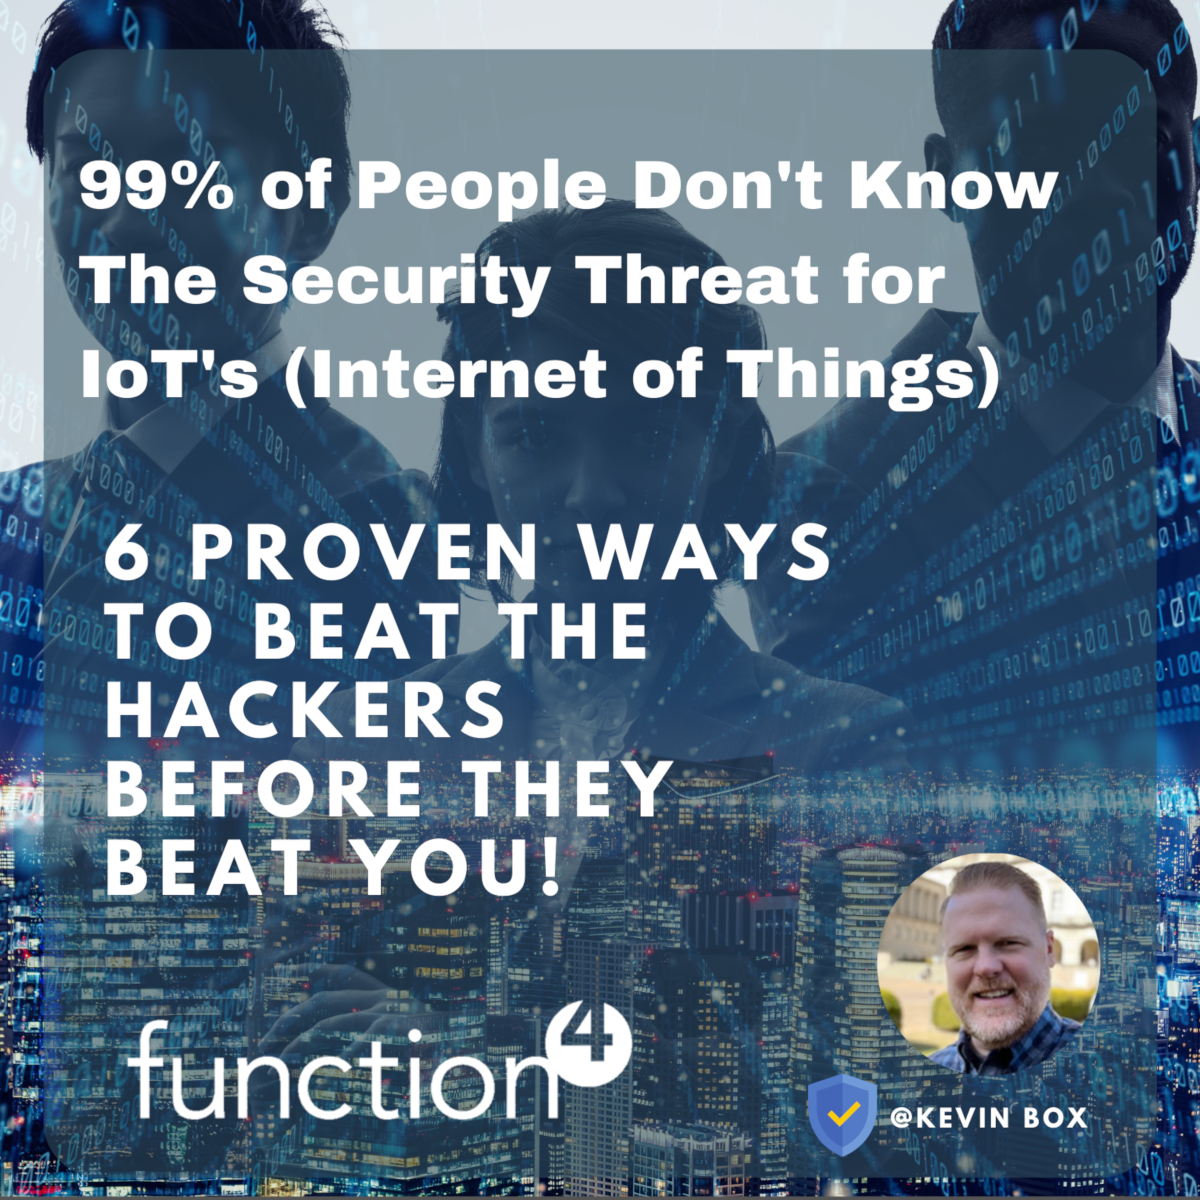 6 Proven Ways to Beat The Hackers Before They Beat You! #1